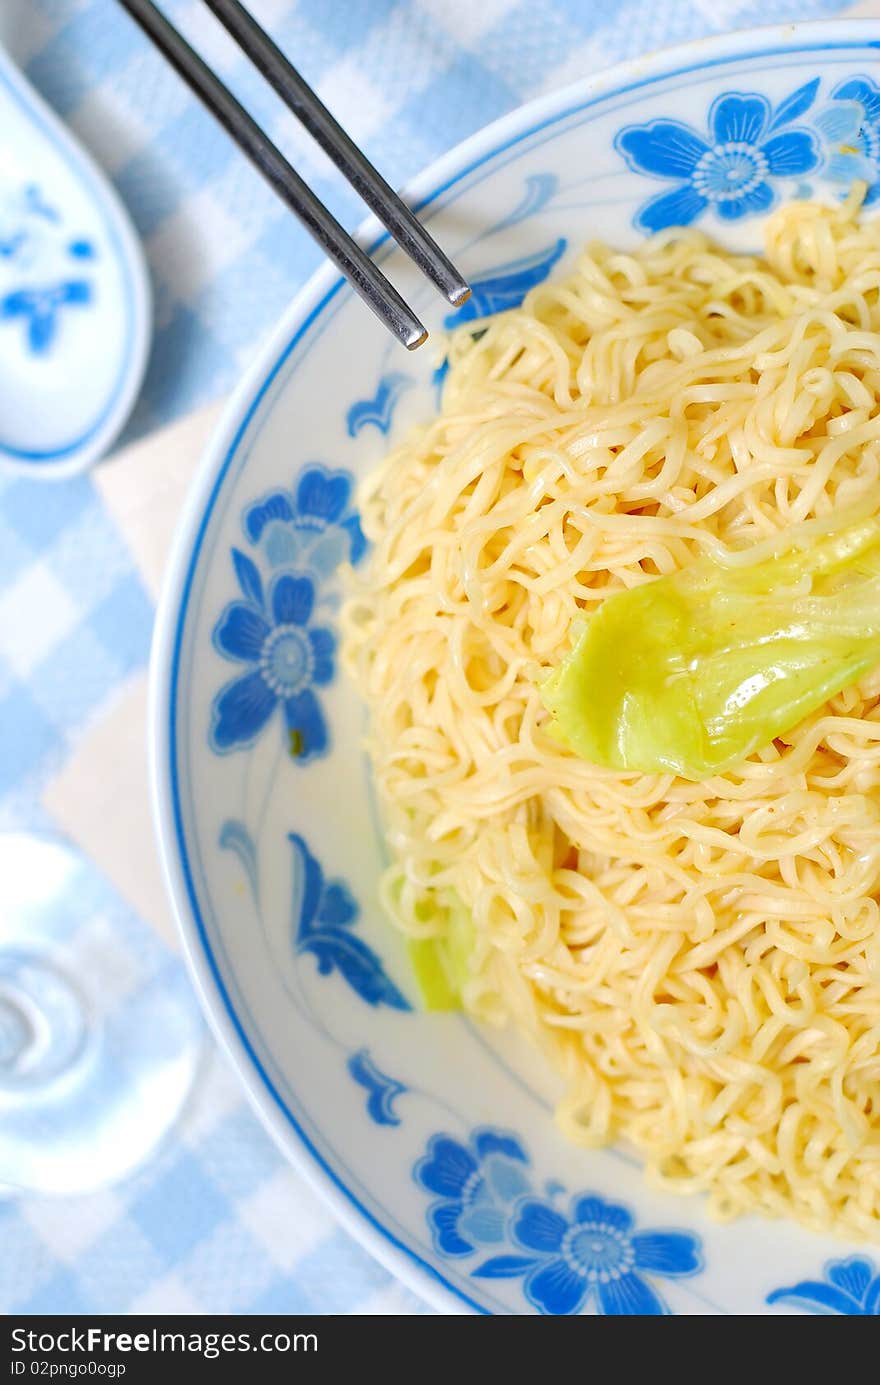 Oriental yellow noodles. For concepts such as diet and slimming, healthy lifestyle, and food and beverage. Oriental yellow noodles. For concepts such as diet and slimming, healthy lifestyle, and food and beverage.